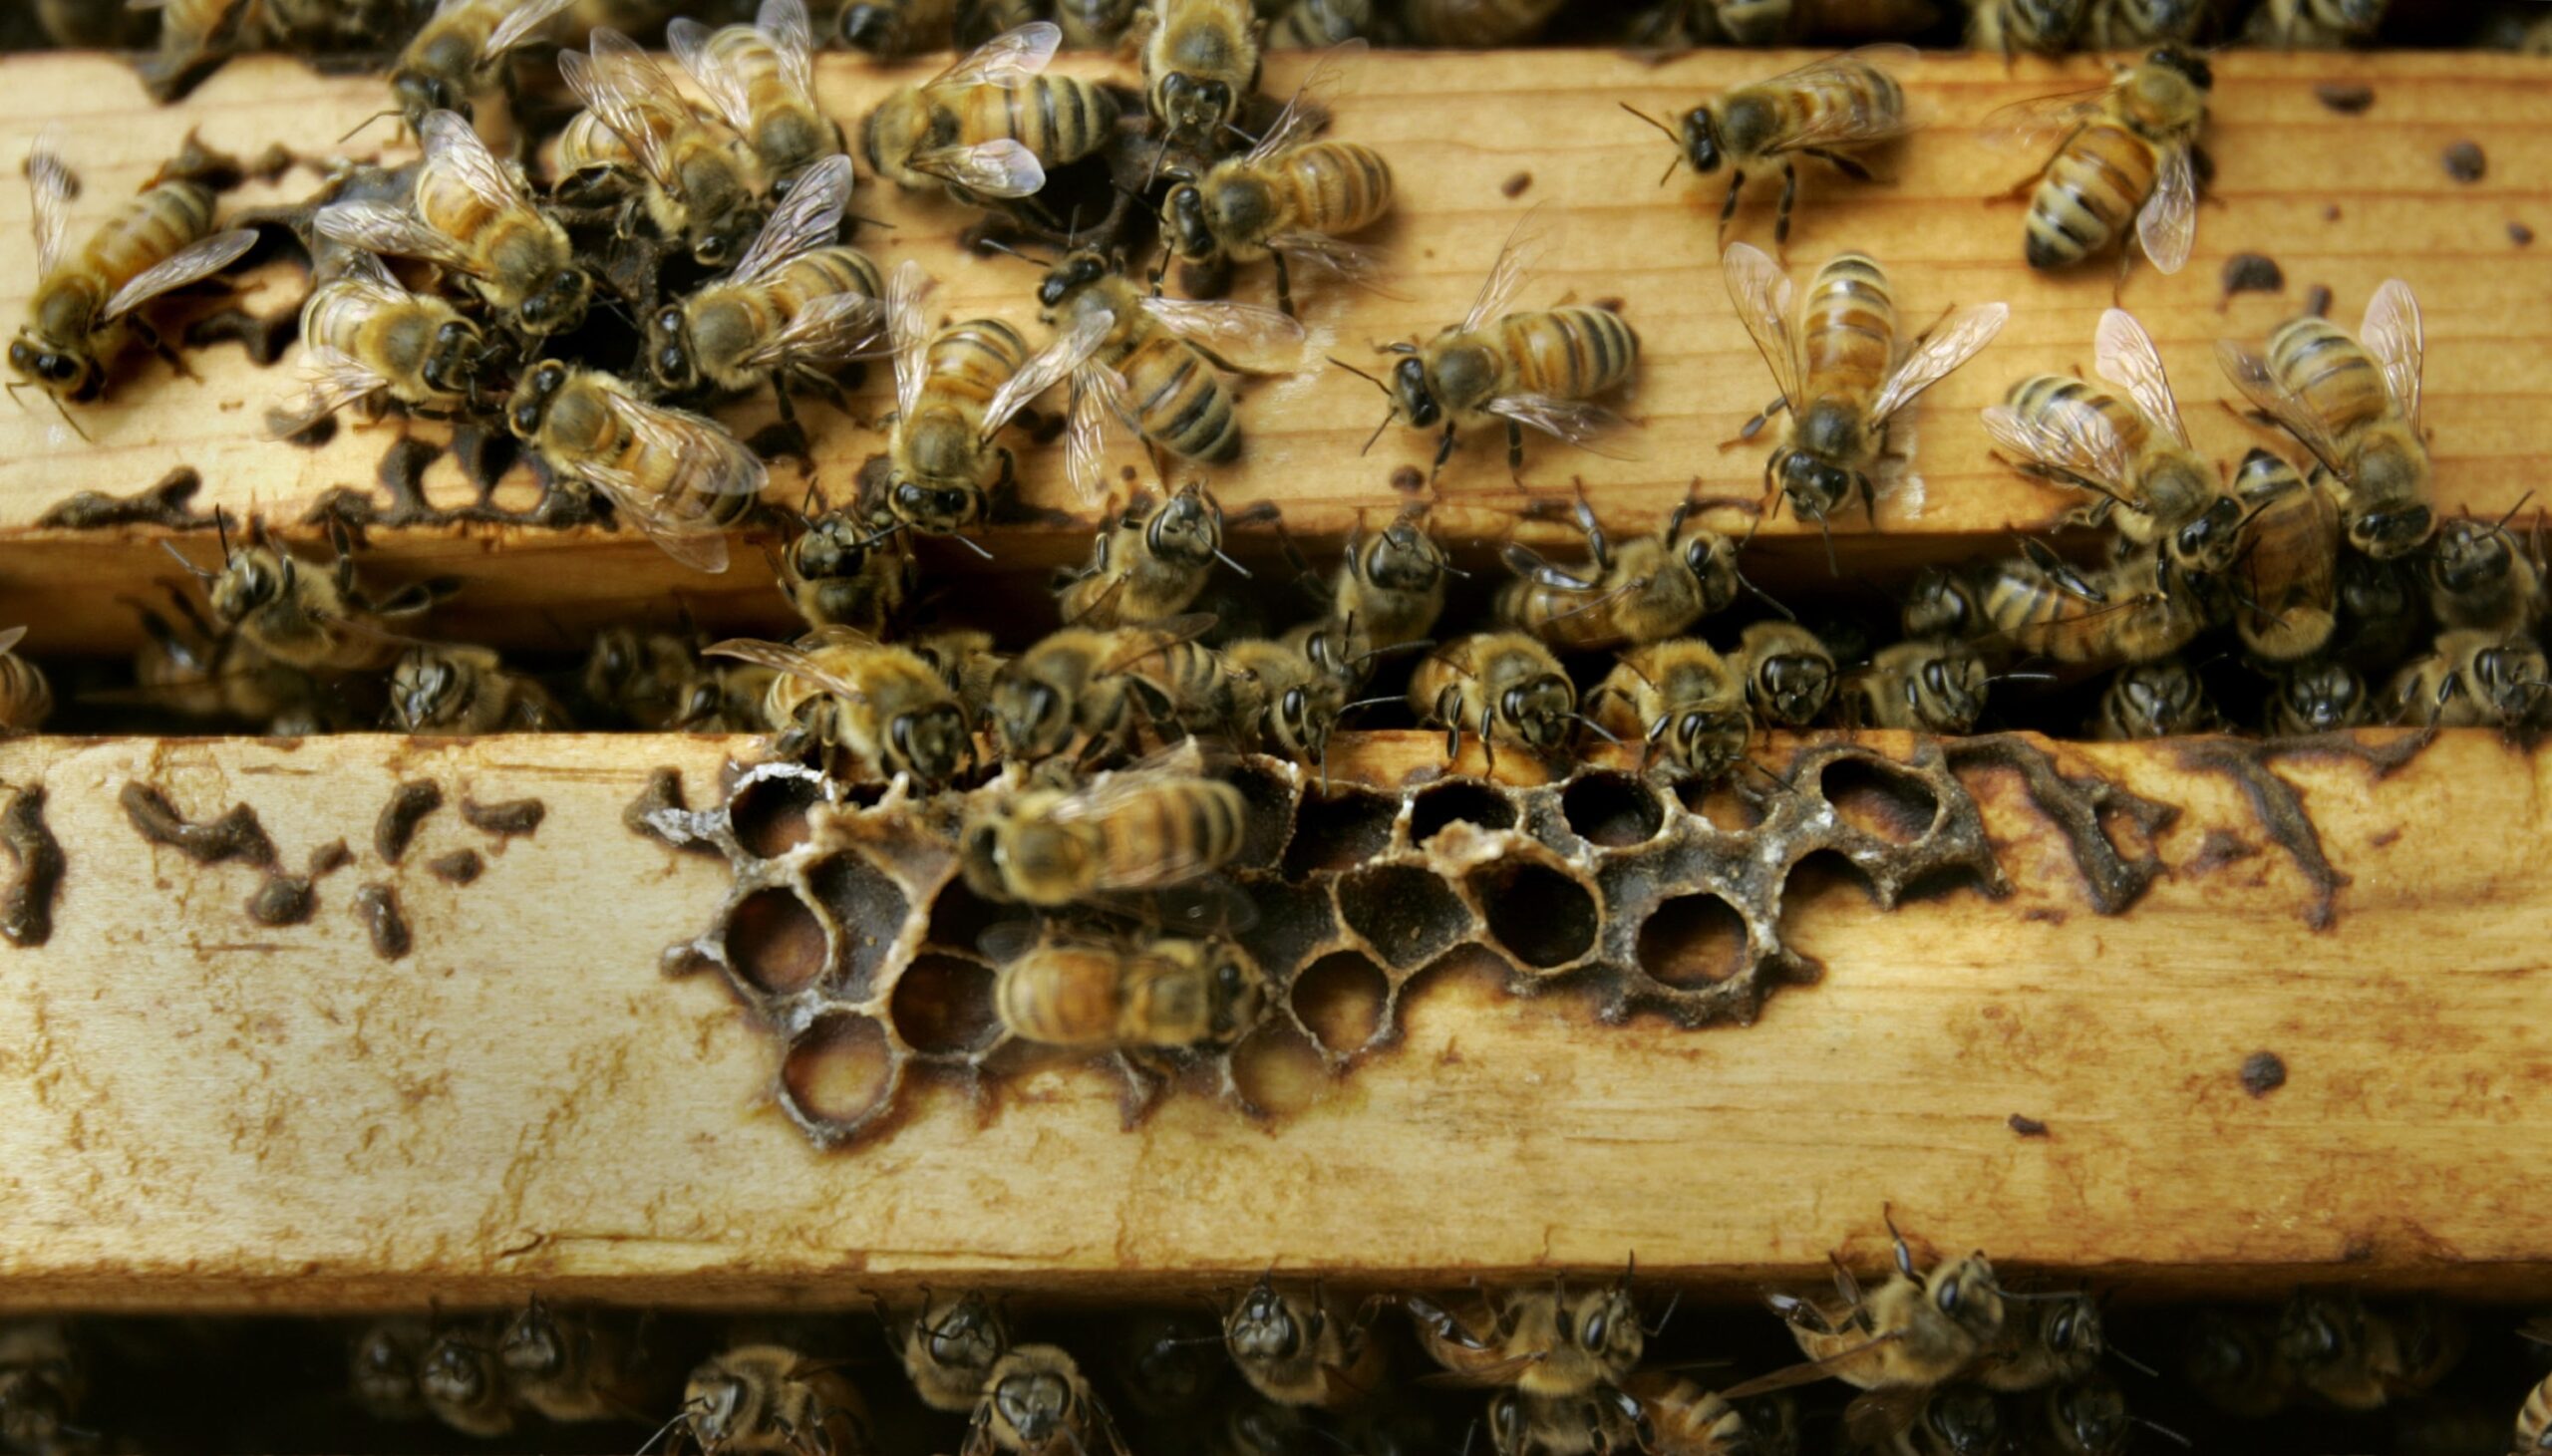 Honeybees are seen inside a colony